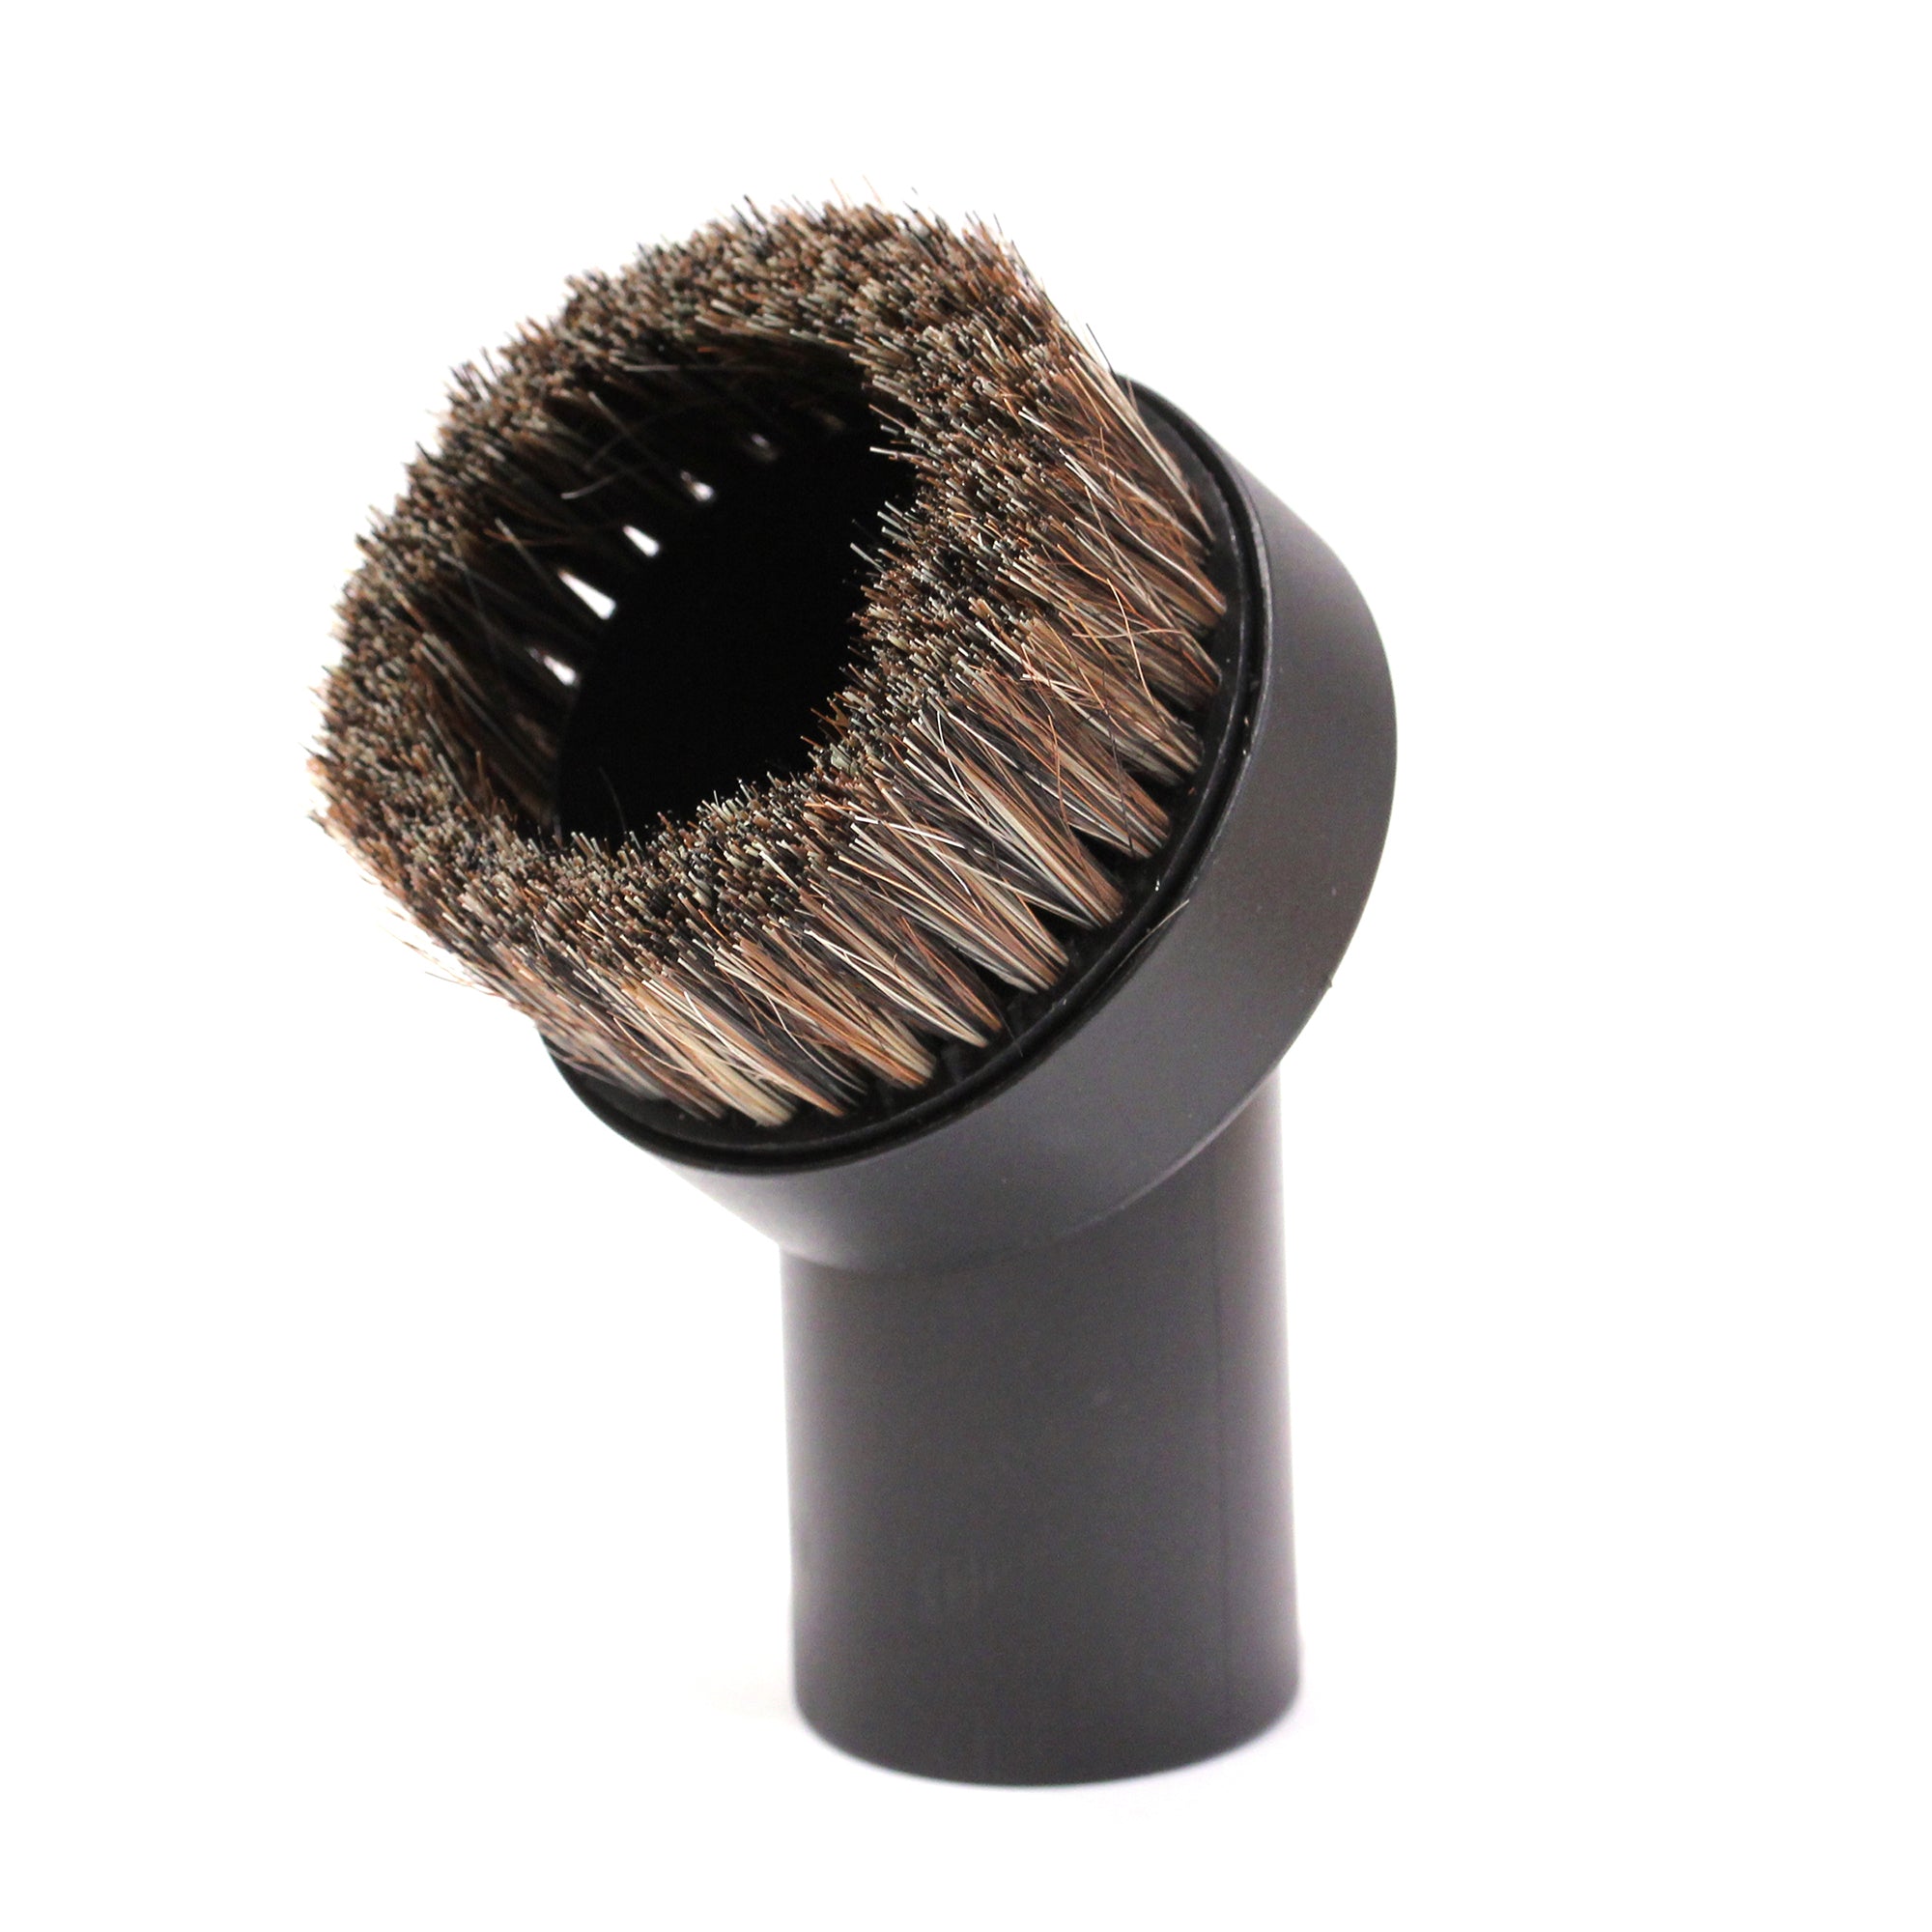 1 1/4 inch Vacuum Attachments Brushes Kit 1-1/4 inch 1-3/8 inch Vacuum  Cleaner Accessories for 32mm and 35mm Standard Hose